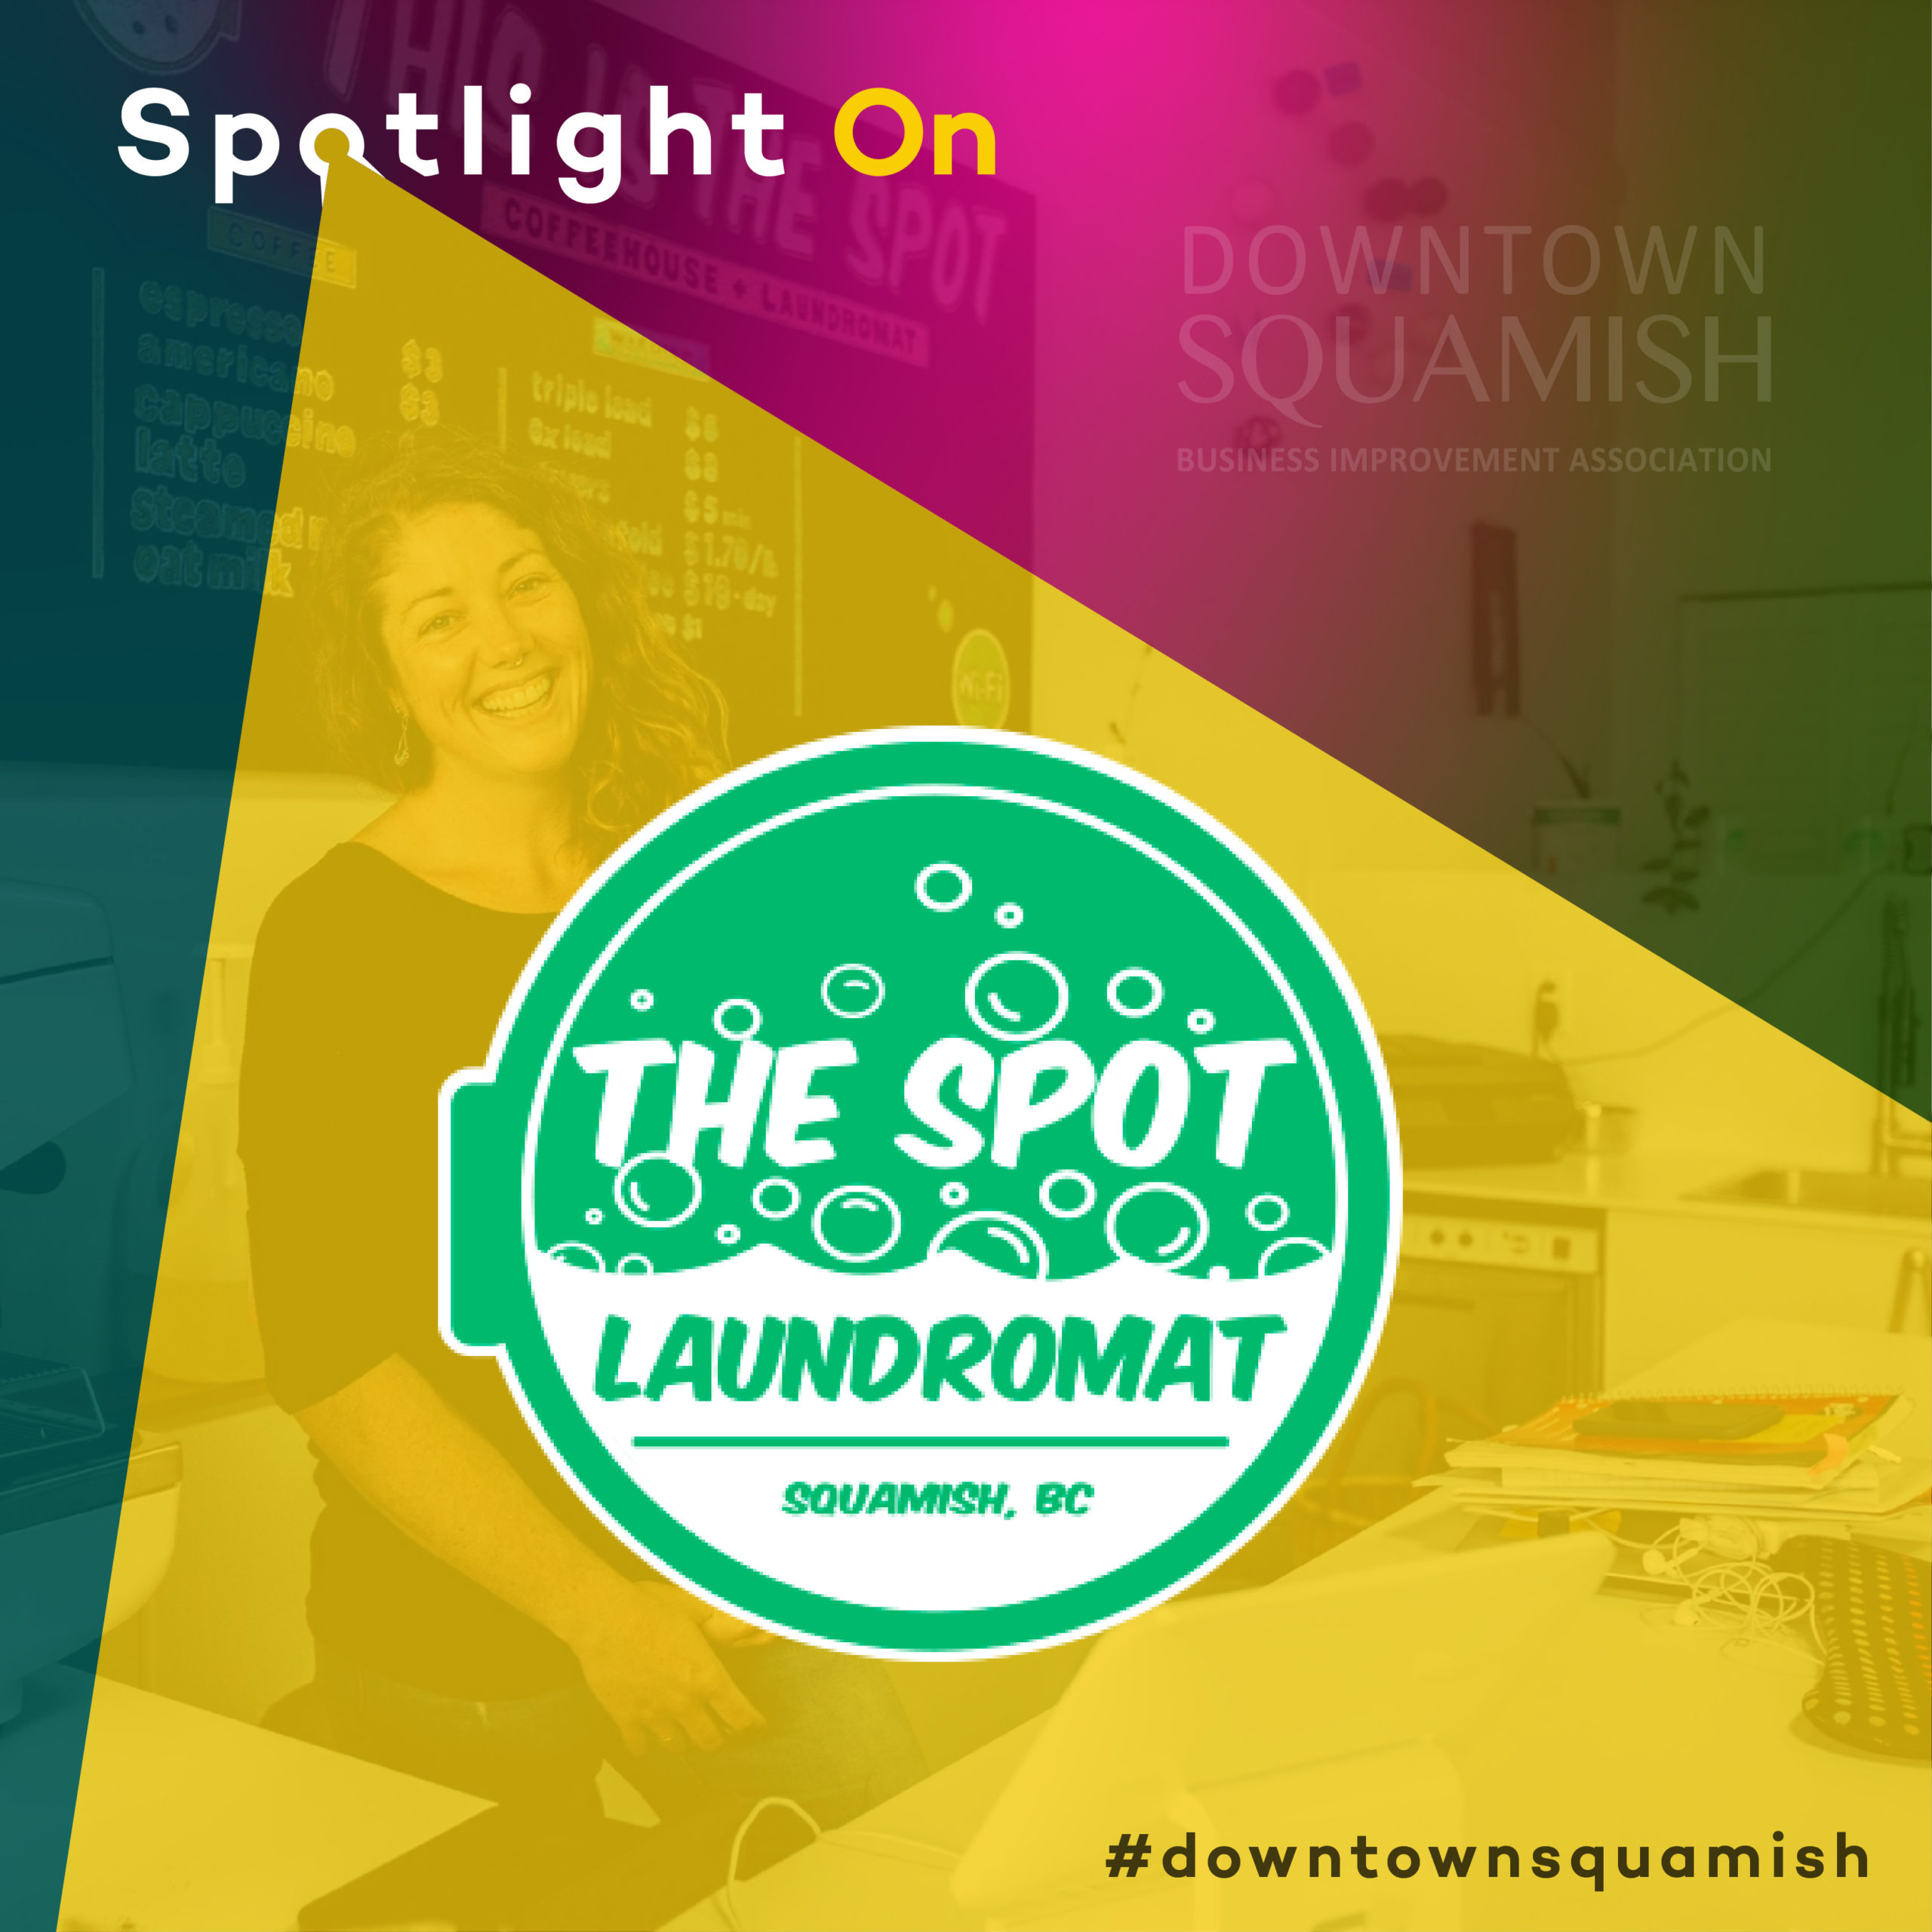 https://www.downtownsquamish.com/wp-content/uploads/2020/09/Spotlight_On_The_Spot-scaled.jpg